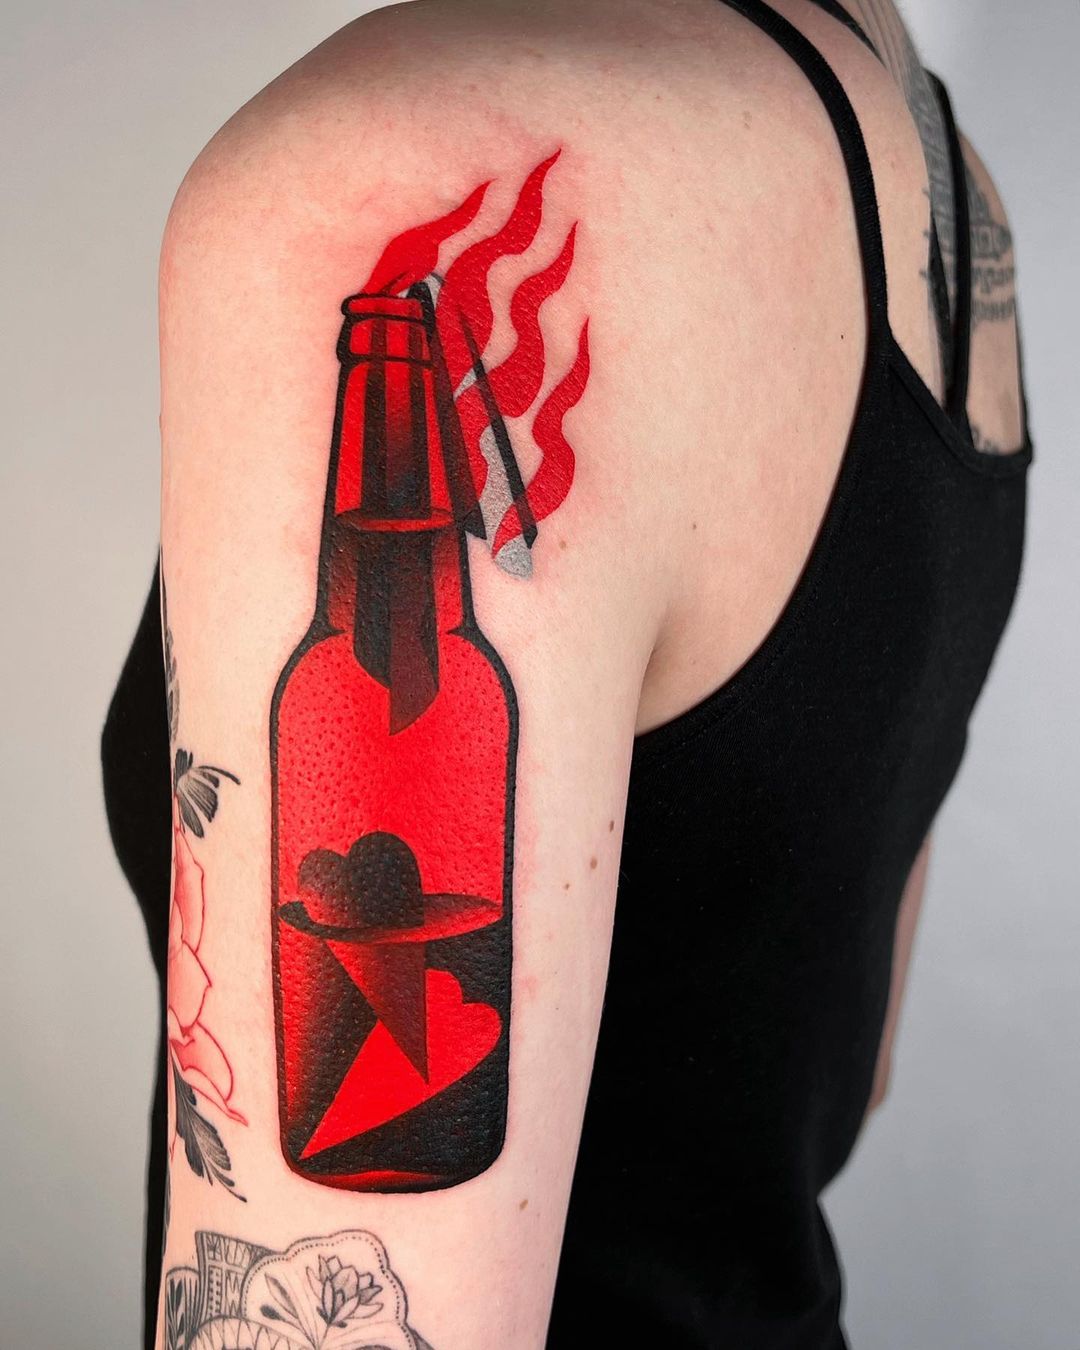 Molotov Cocktail done by Peyton Fannin at The Murder Art Collective,  Lexington KY : r/tattoos